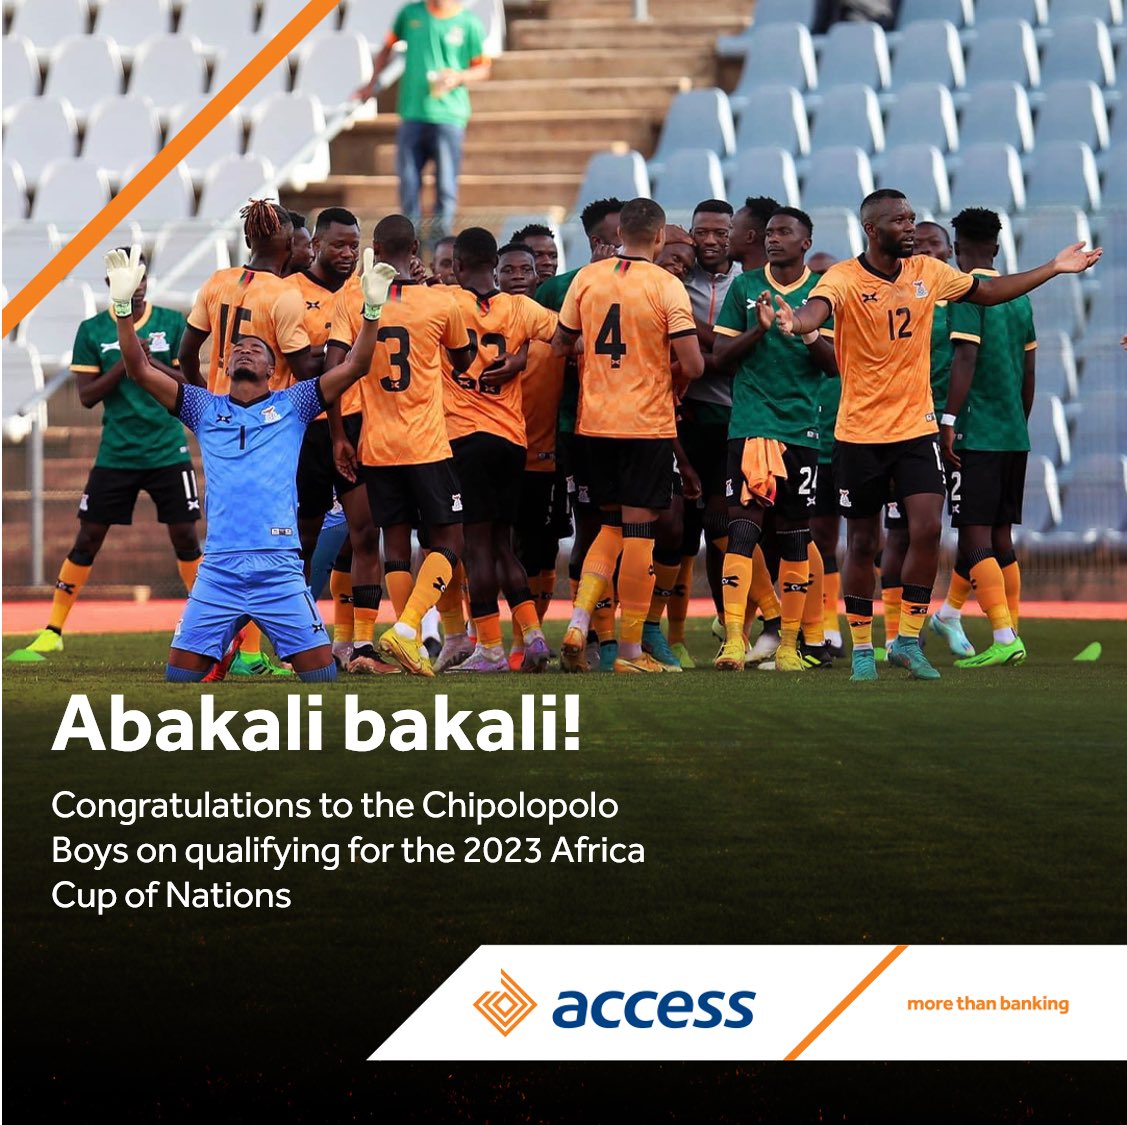 We are beyond proud of the Chipolopolo Boys for their incredible accomplishment of qualifying for the 2023 Africa Cup of Nations! Zambia is beaming with pride.

#AccessMoreProducts
#MoreThanBanking